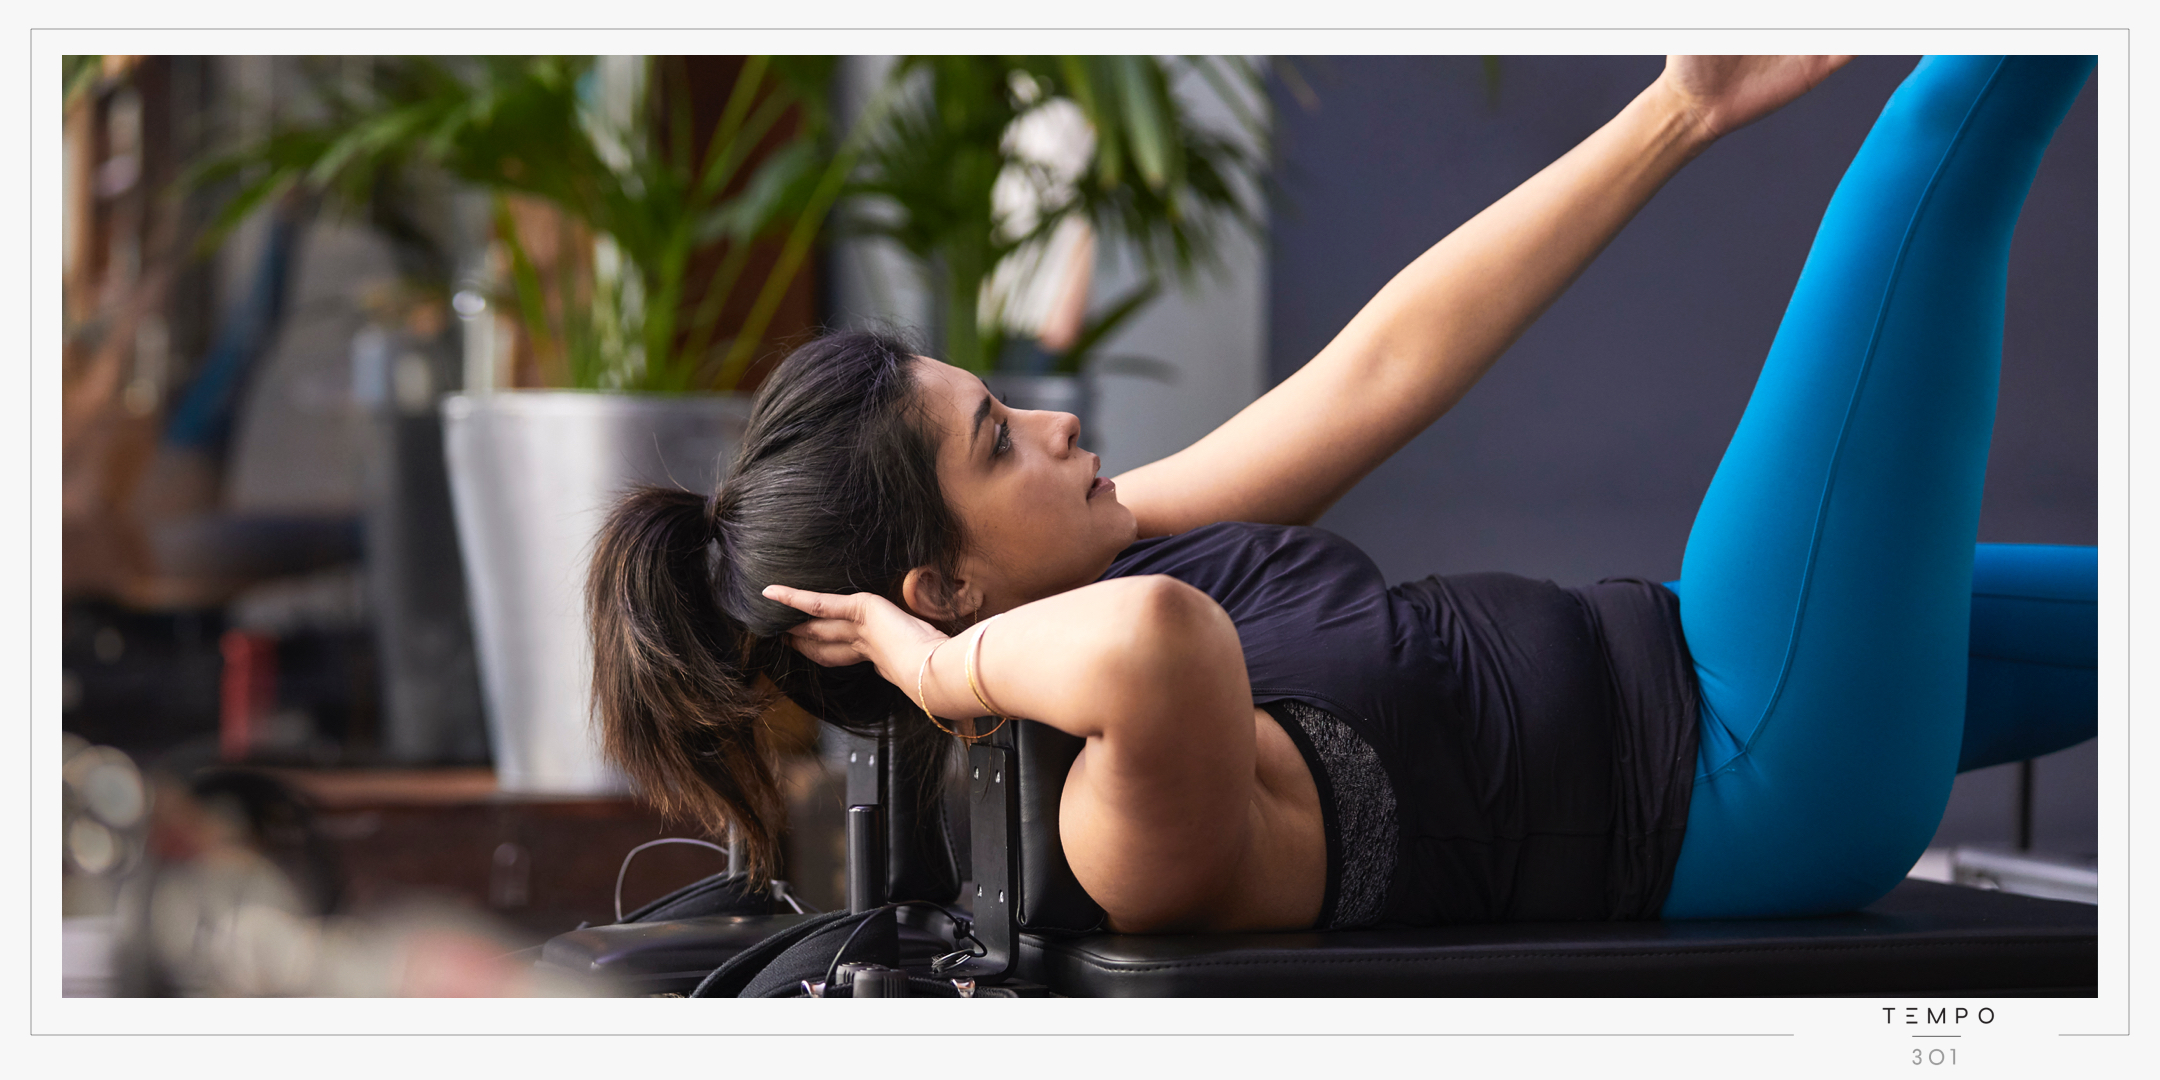 Reformer pilates deals in london, hackney, shoreditch and elephant and castle